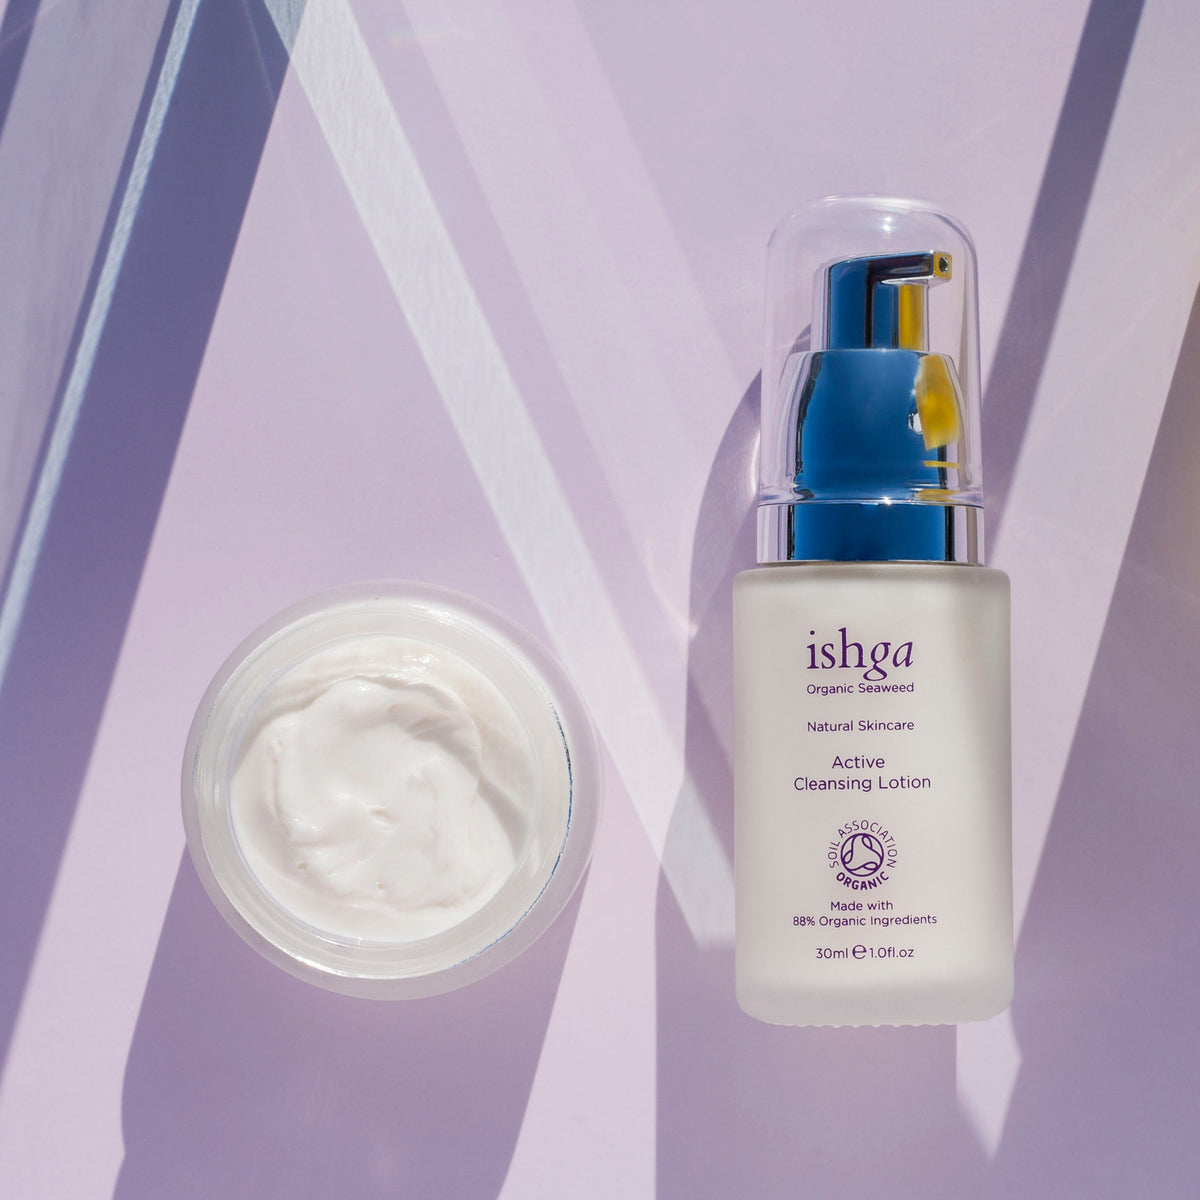 Opened jar of ishga Anti-oxidant Marine Cream and a bottle of Active Cleansing Lotion